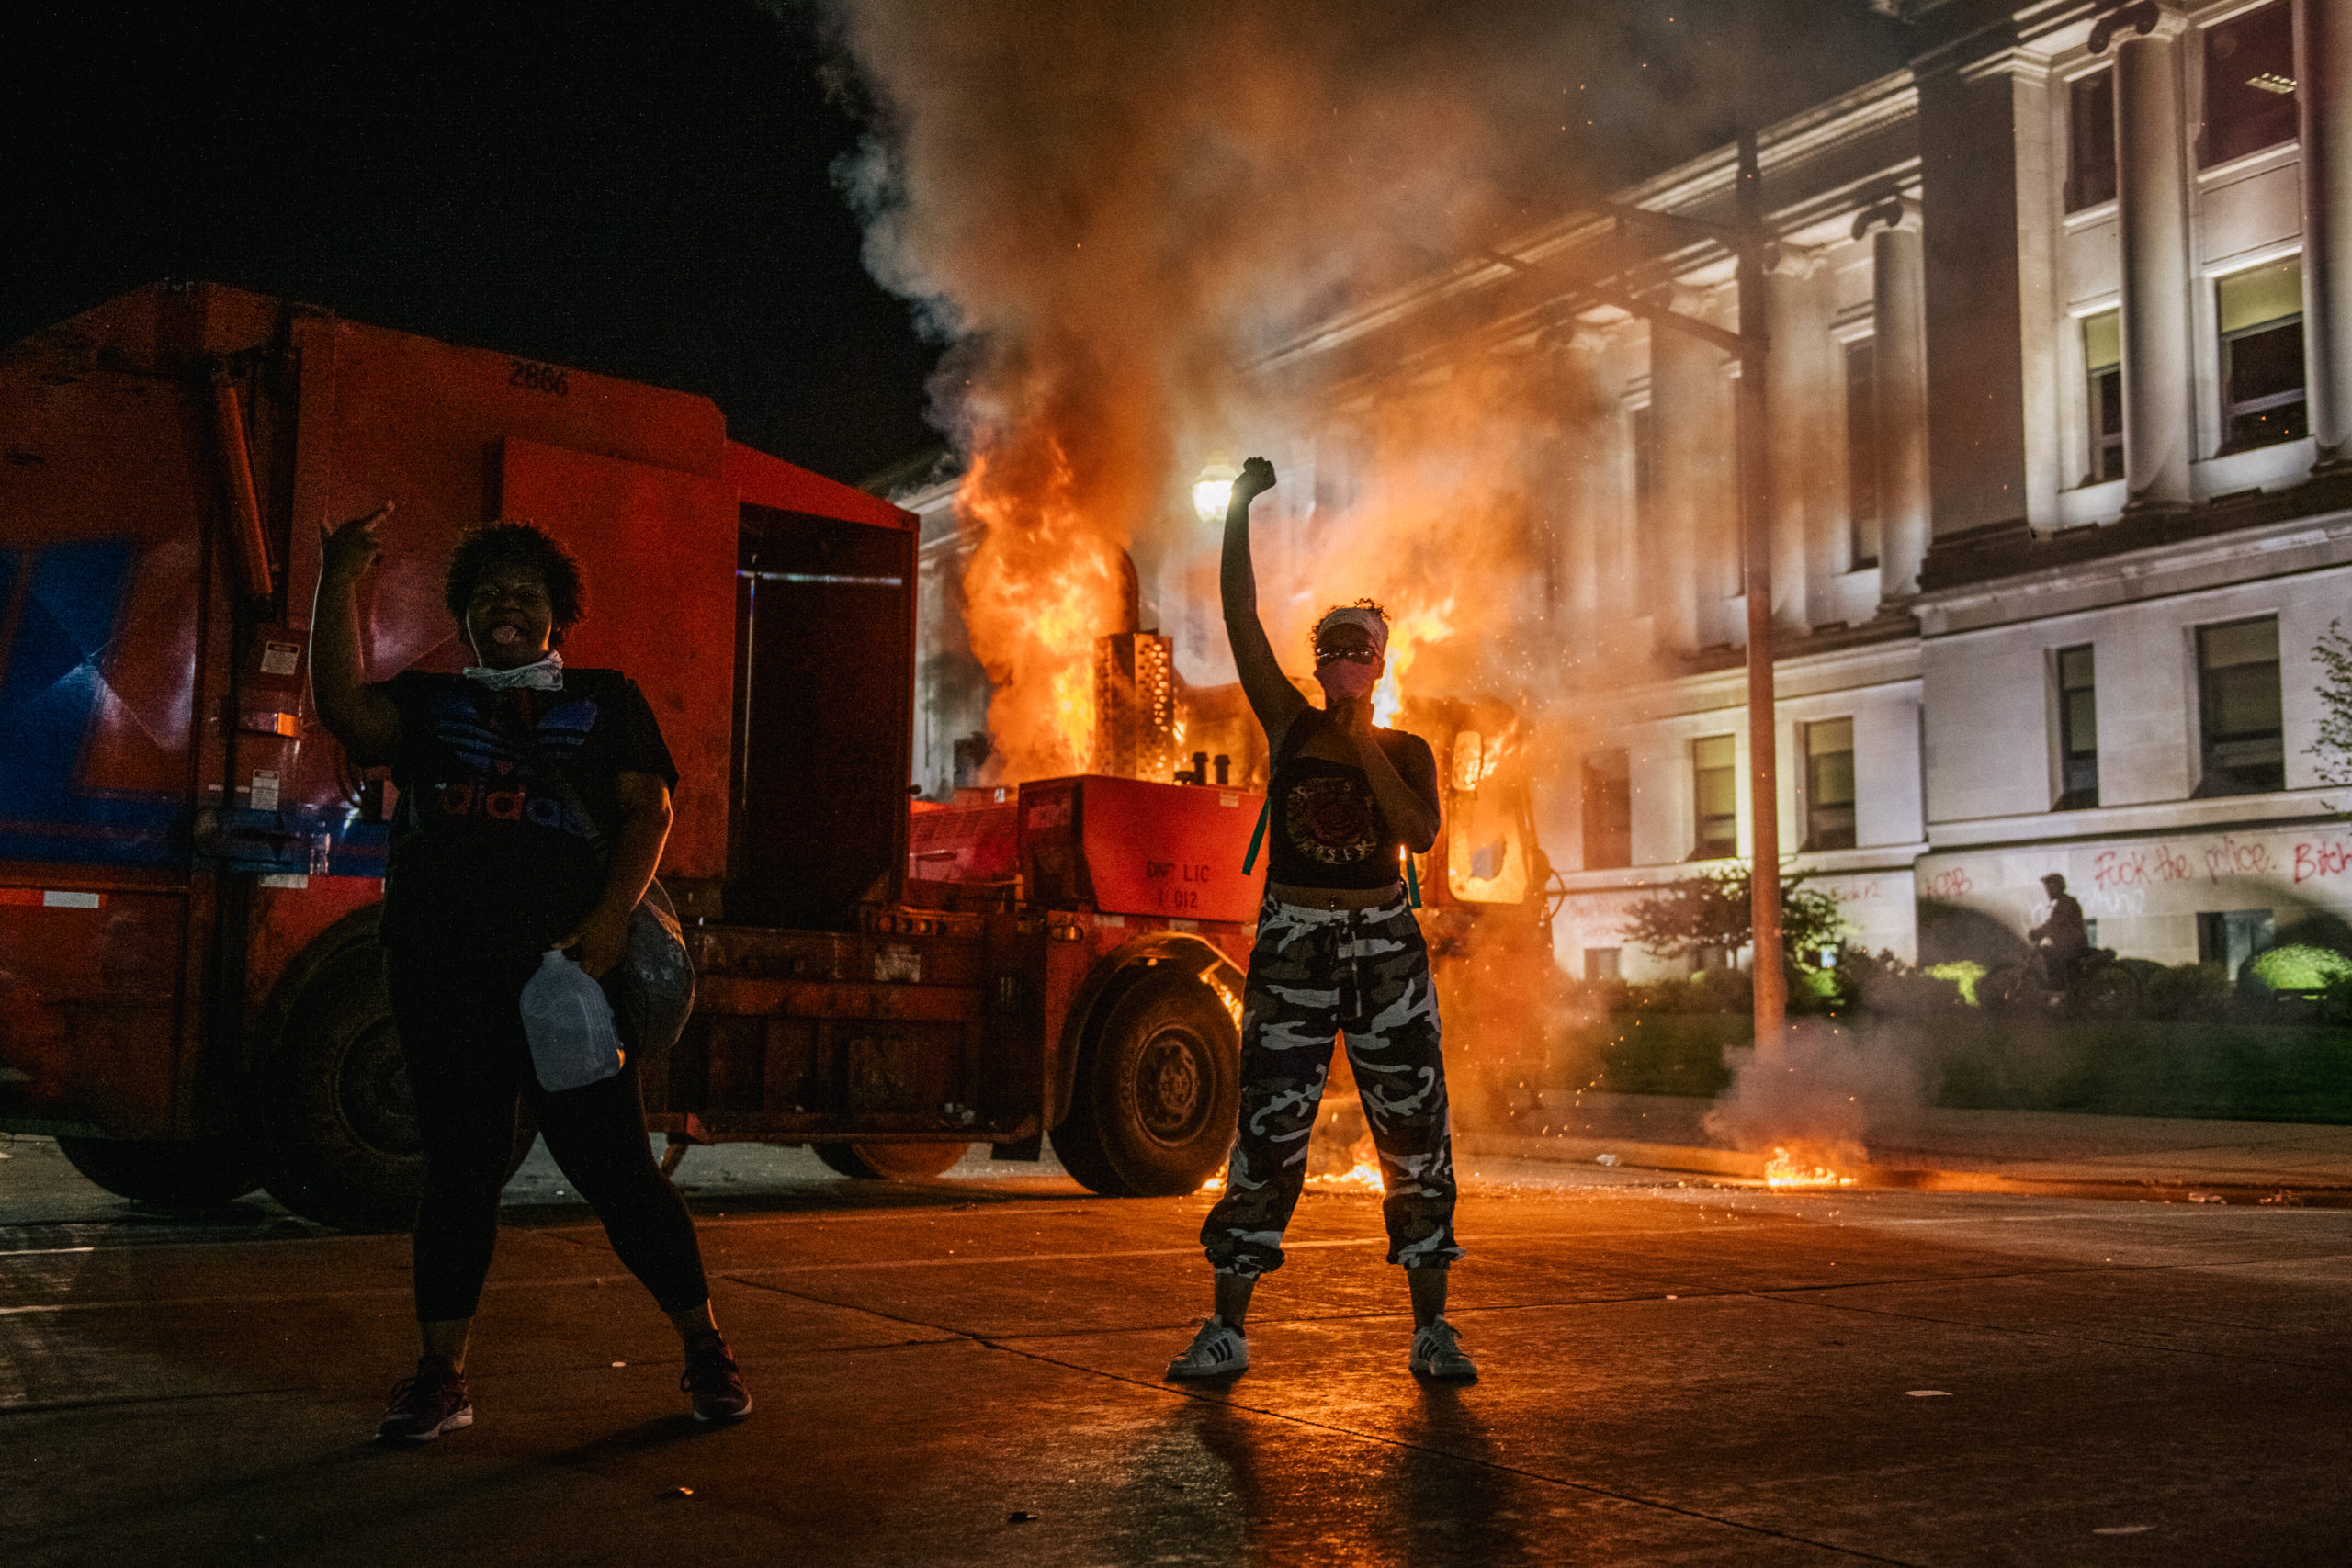 KENOSHA, WI - AUGUST 24: Demonstrators chant in front of a burning truck on August 24, 2020 in Kenosha, Wisconsin. This is the second night of rioting after the shooting of Jacob Blake, 29, on August 23. Blake was shot multiple times in the back by Wisconsin police officers after attempting to enter into the drivers side of a vehicle. (Photo by Brandon Bell/Getty Images)